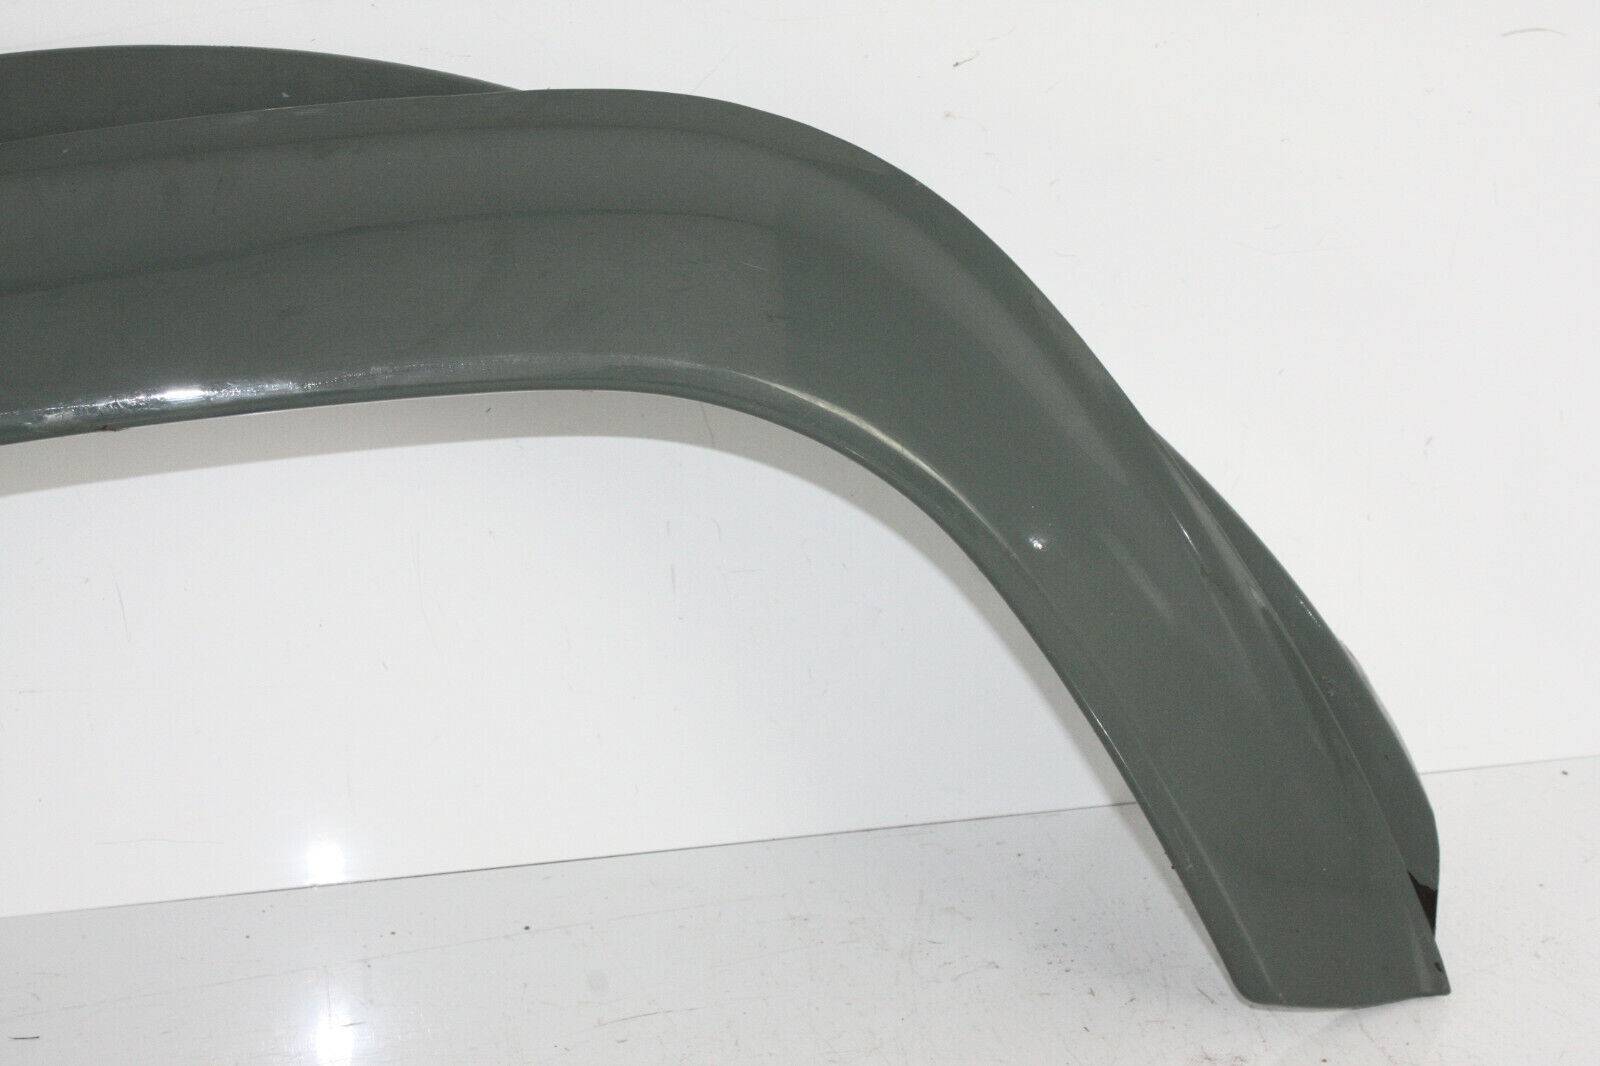 Land-Rover-Defender-Wheel-Arch-Flare-Spat-Front-Left-Painted-Type-Genuine-175367529954-3